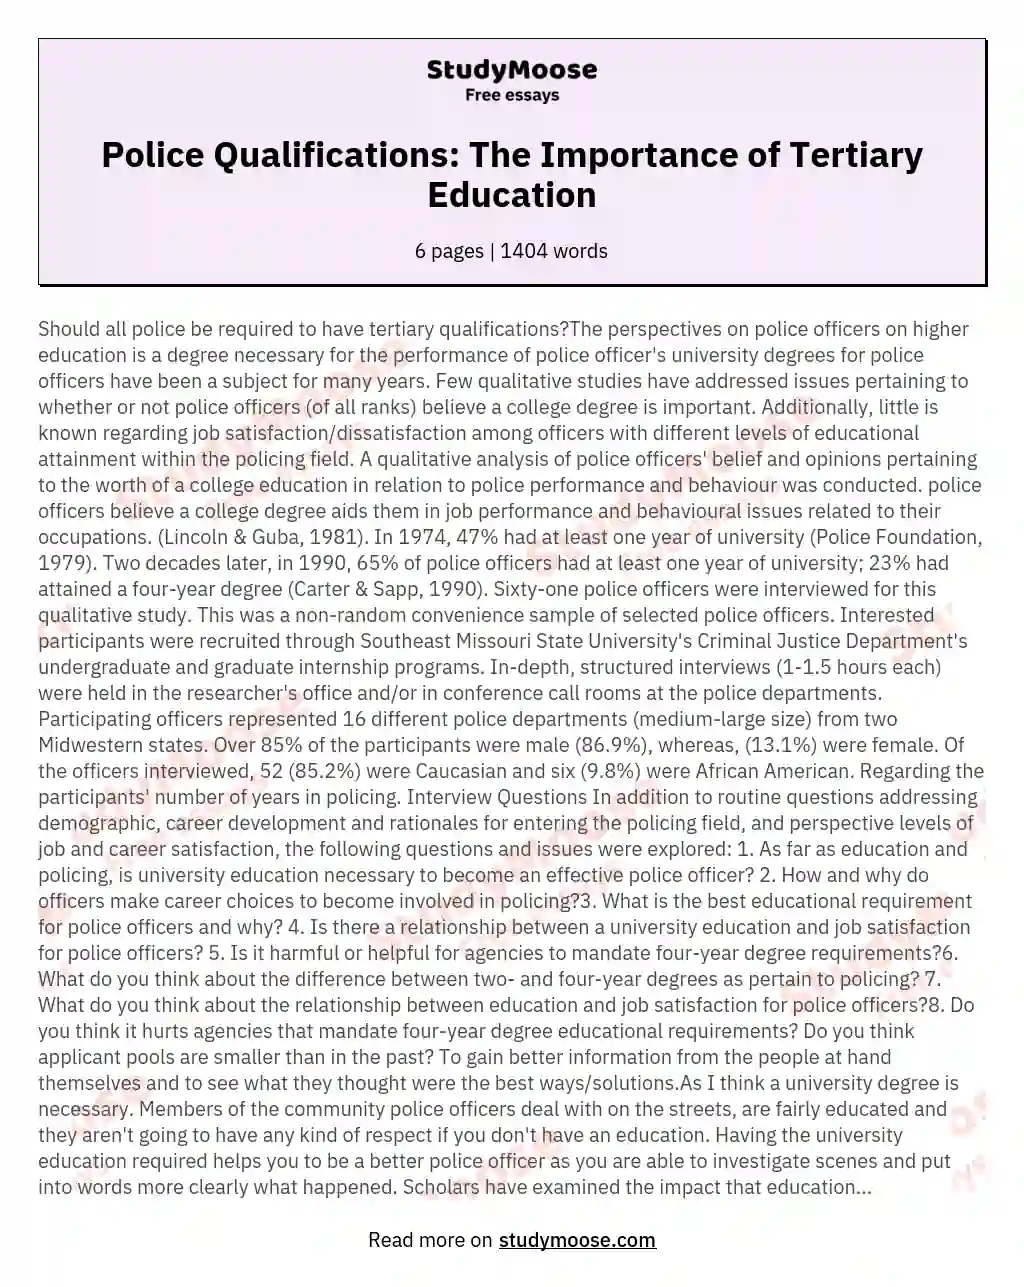 Police Qualifications: The Importance of Tertiary Education